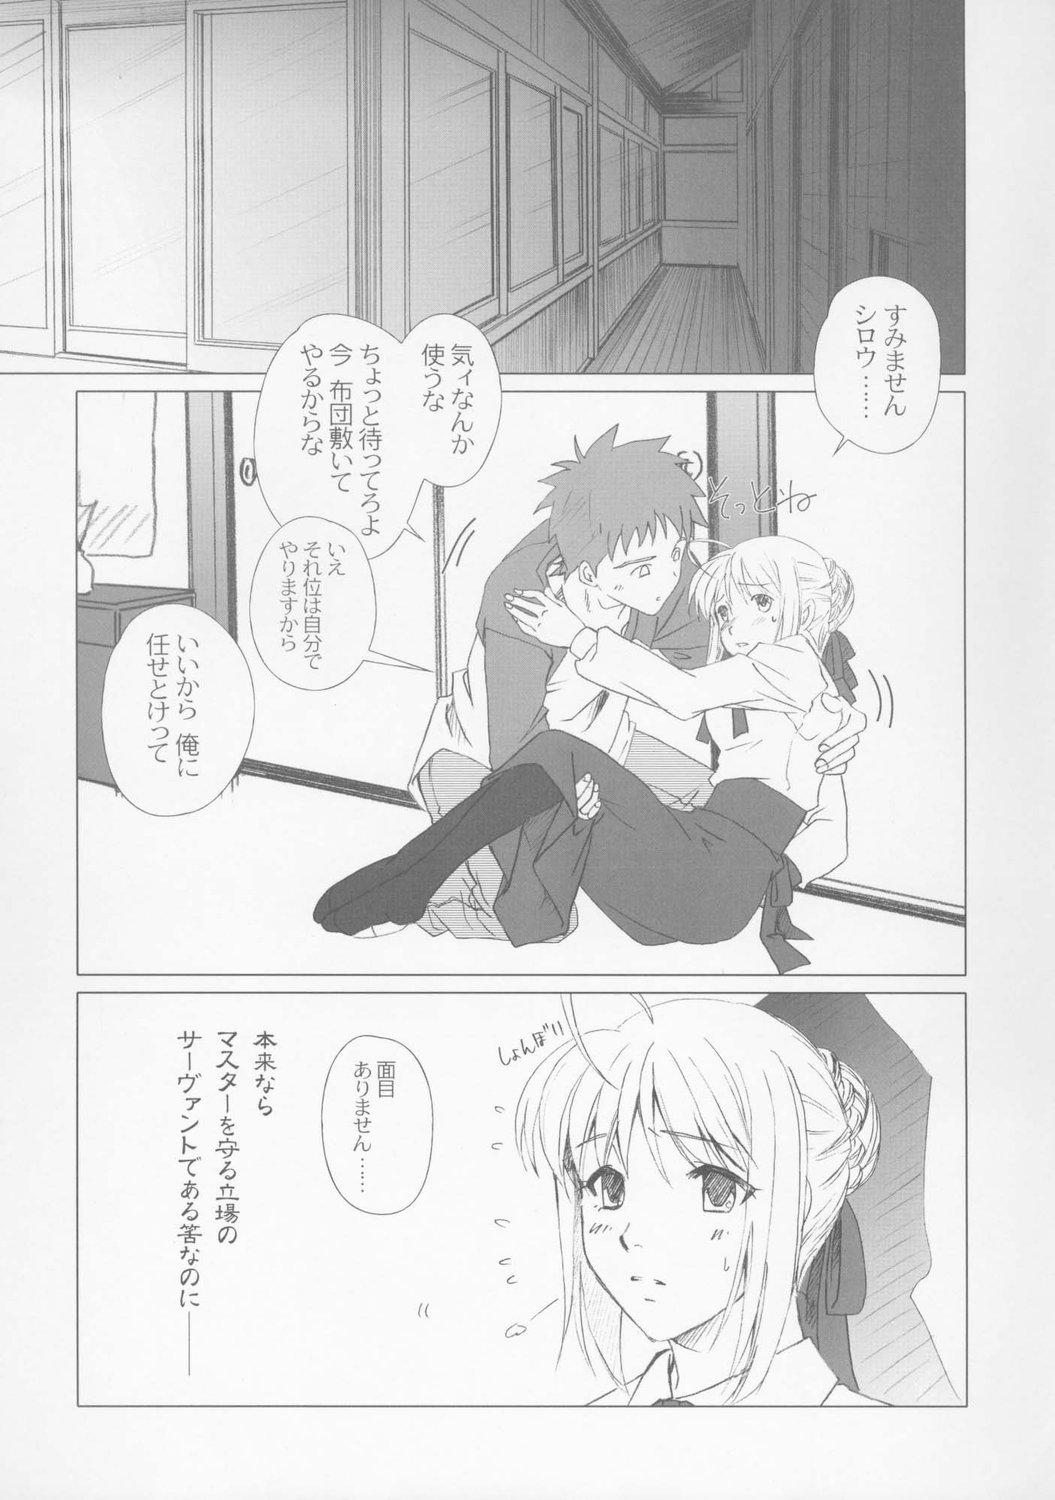 Roundass Eien no Uta - Ever Song - Fate stay night Fate hollow ataraxia Ball Busting - Page 7